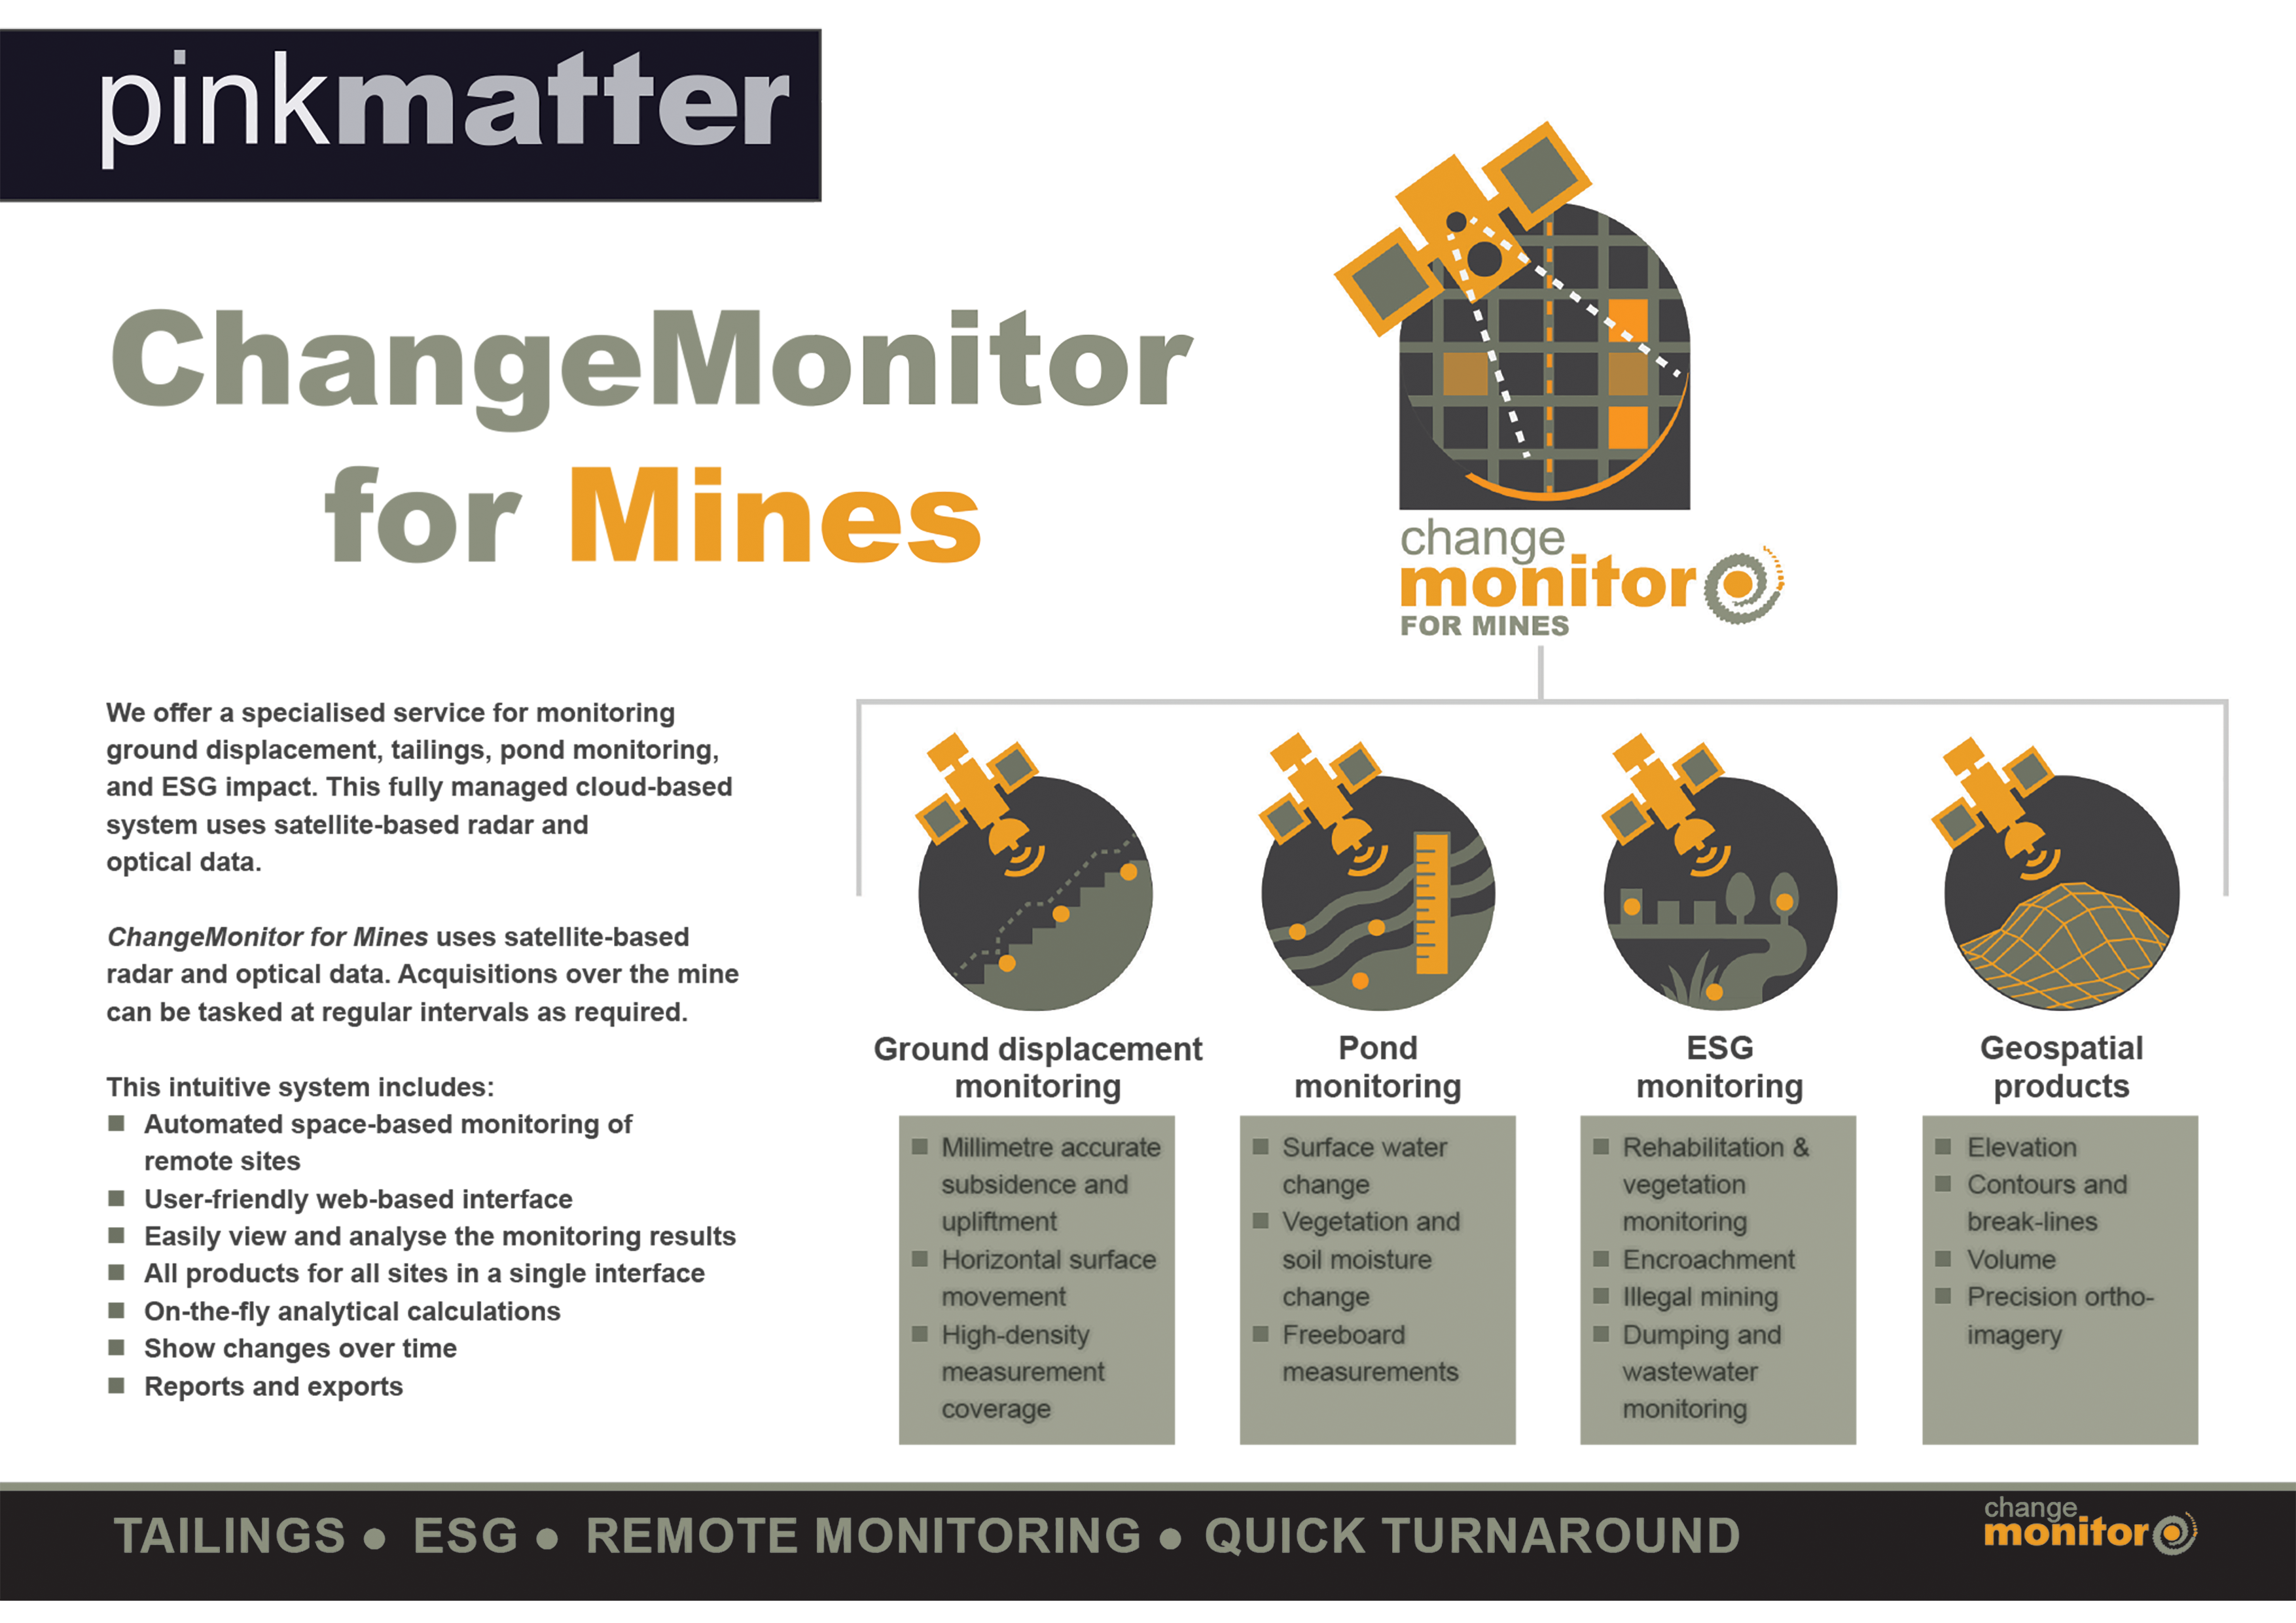 Pinkmatter_ChangeMonitor_for_Mines_Brochure Cover